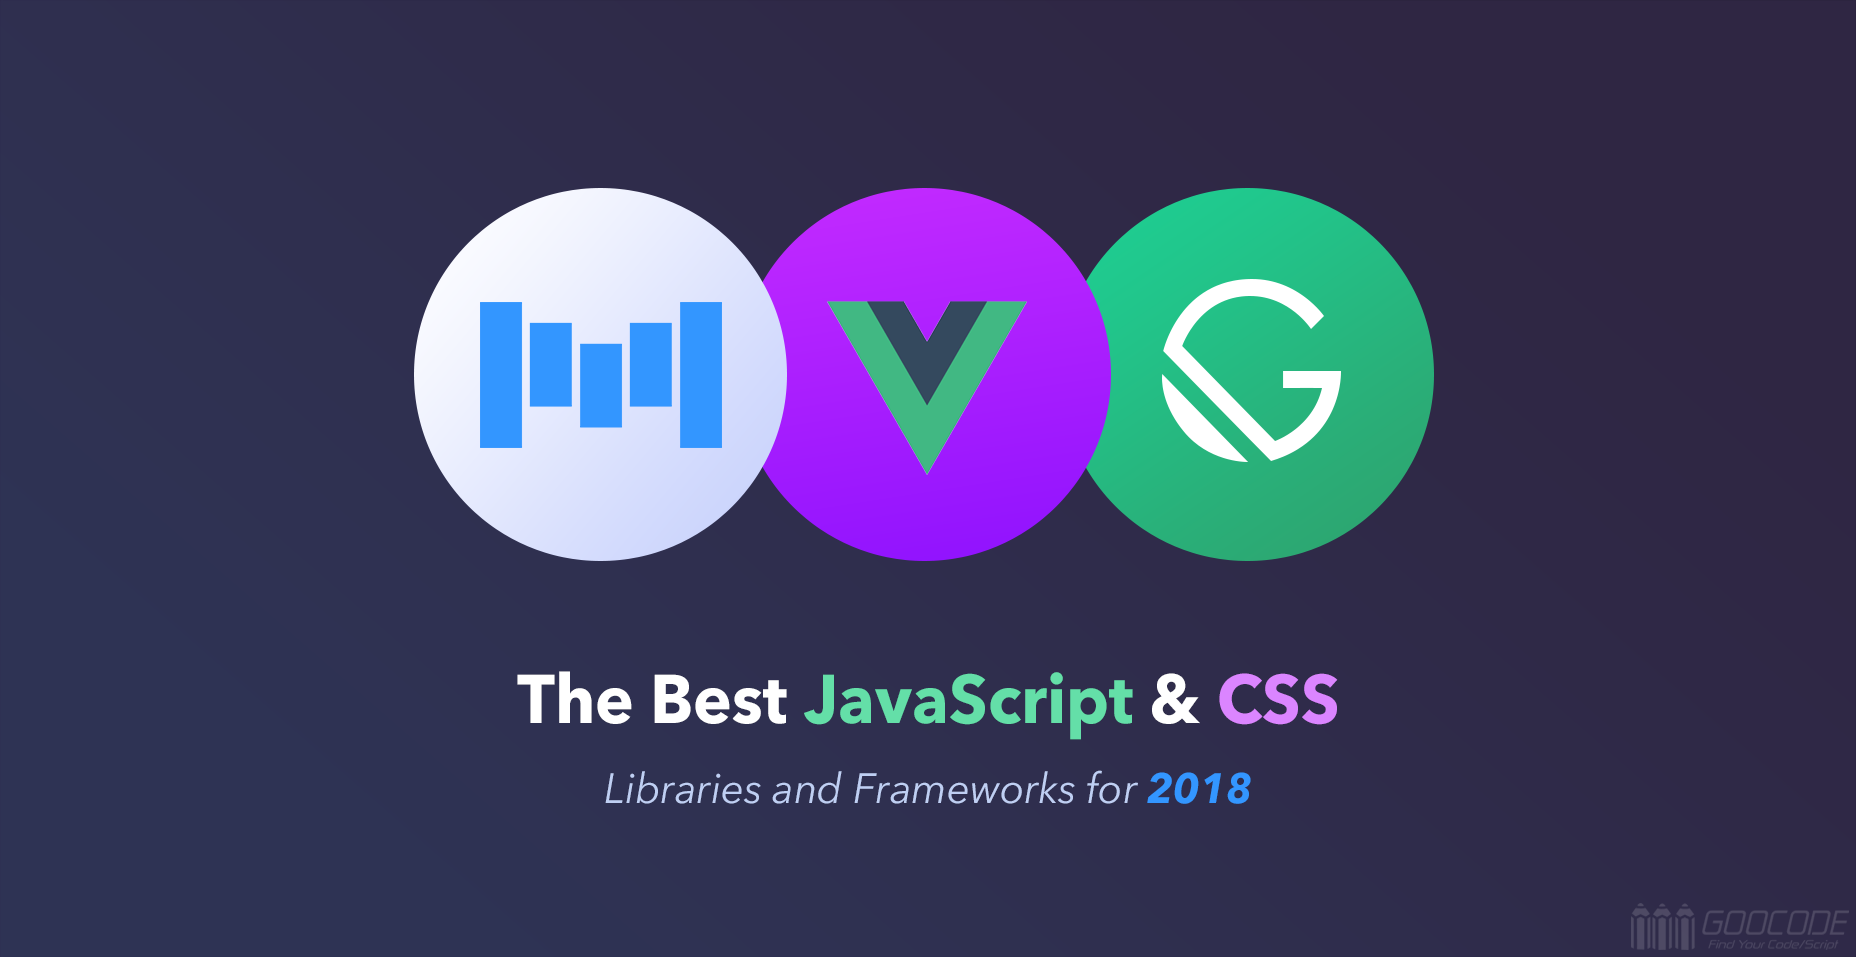 Part 2: 10 interesting Javascript and CSS libraries